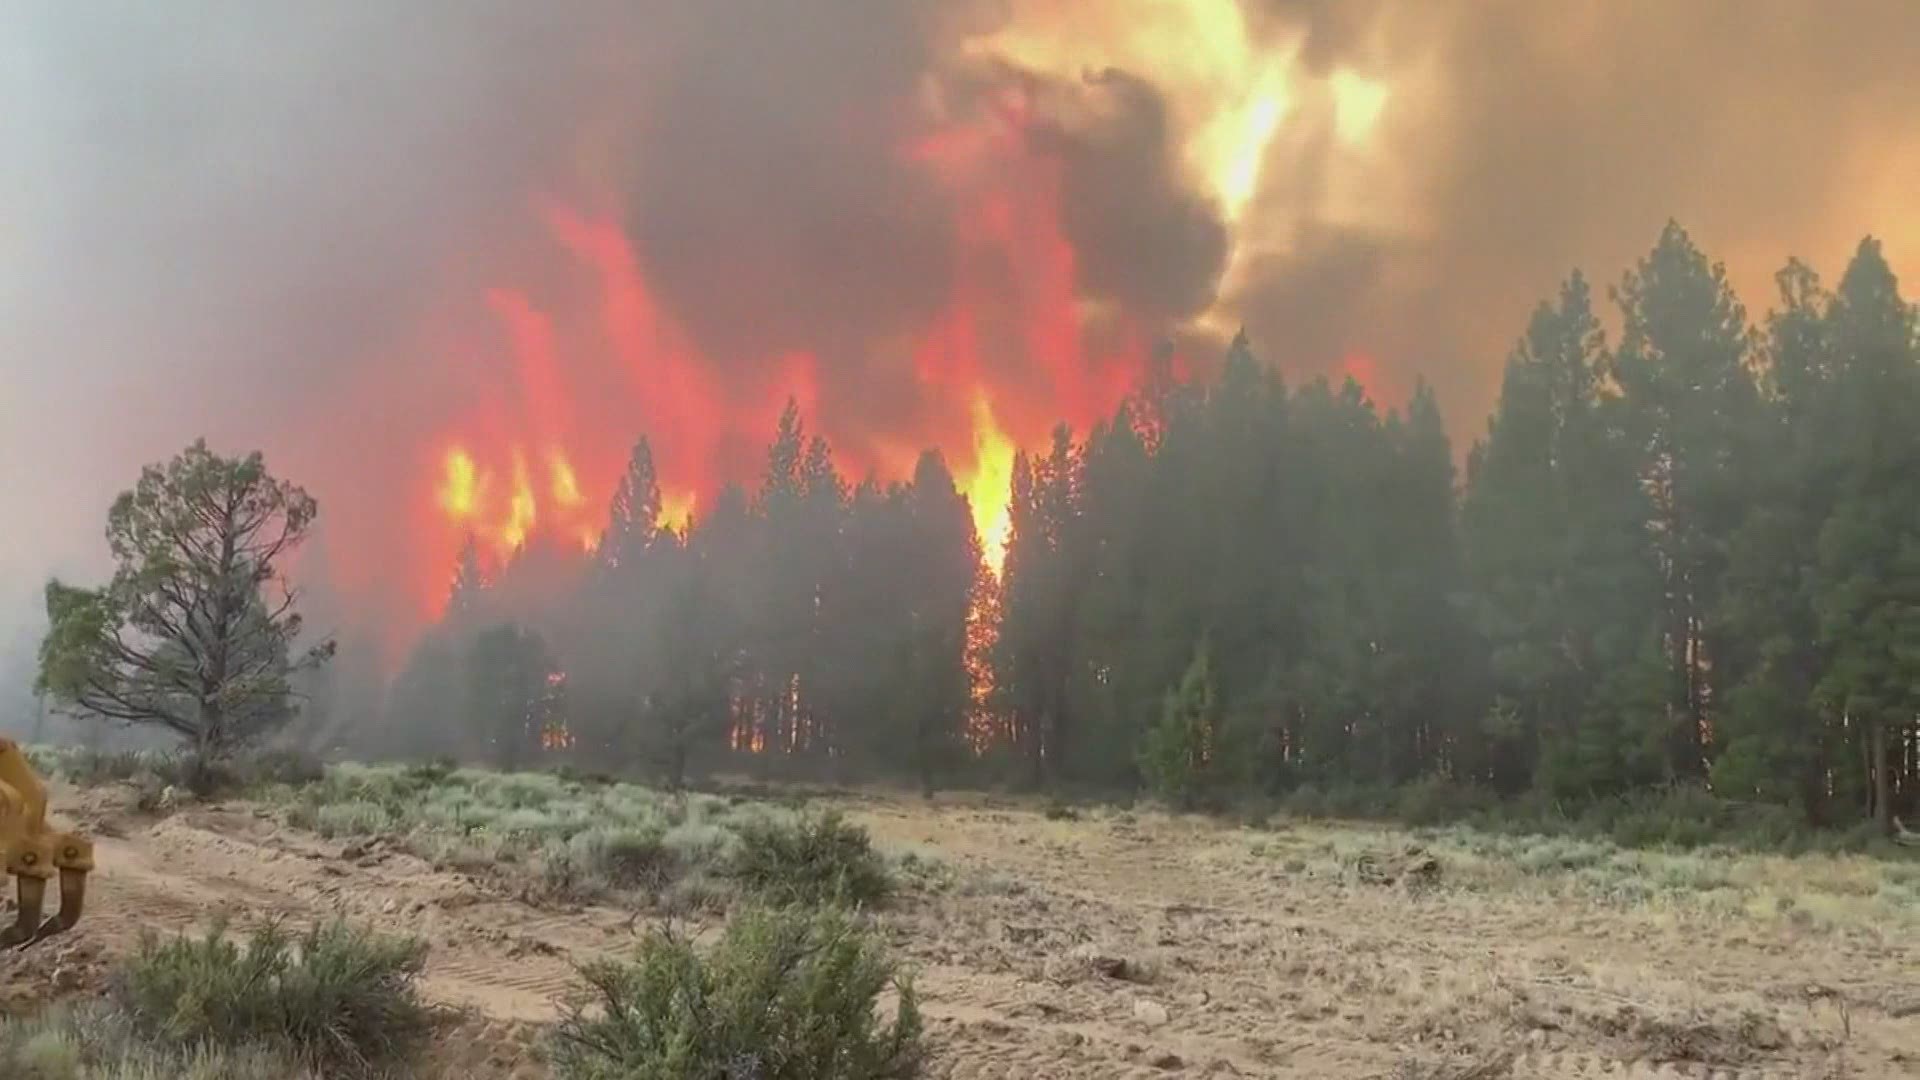 Multiple agencies in Washington are sending their firefighters to help crews fighting the massive Bootleg Fire that's burned more than 200,000 acres.